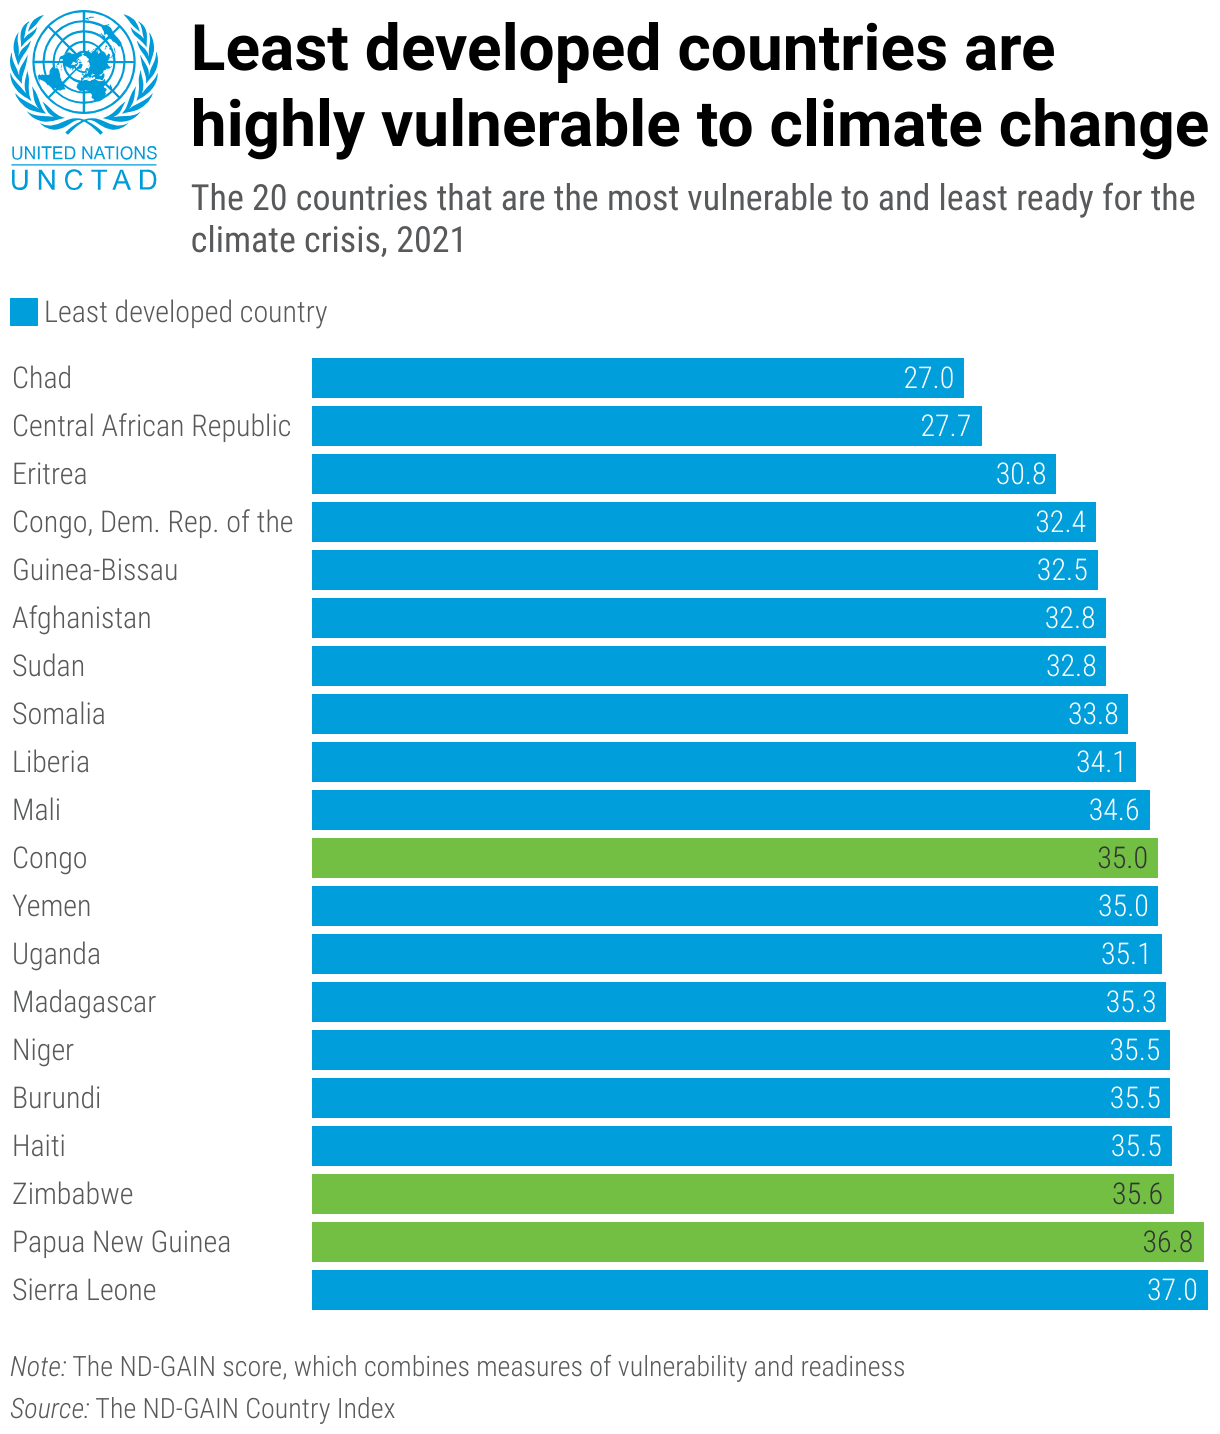 Bar chart showing the 20 countries most vulnerable to climate change.